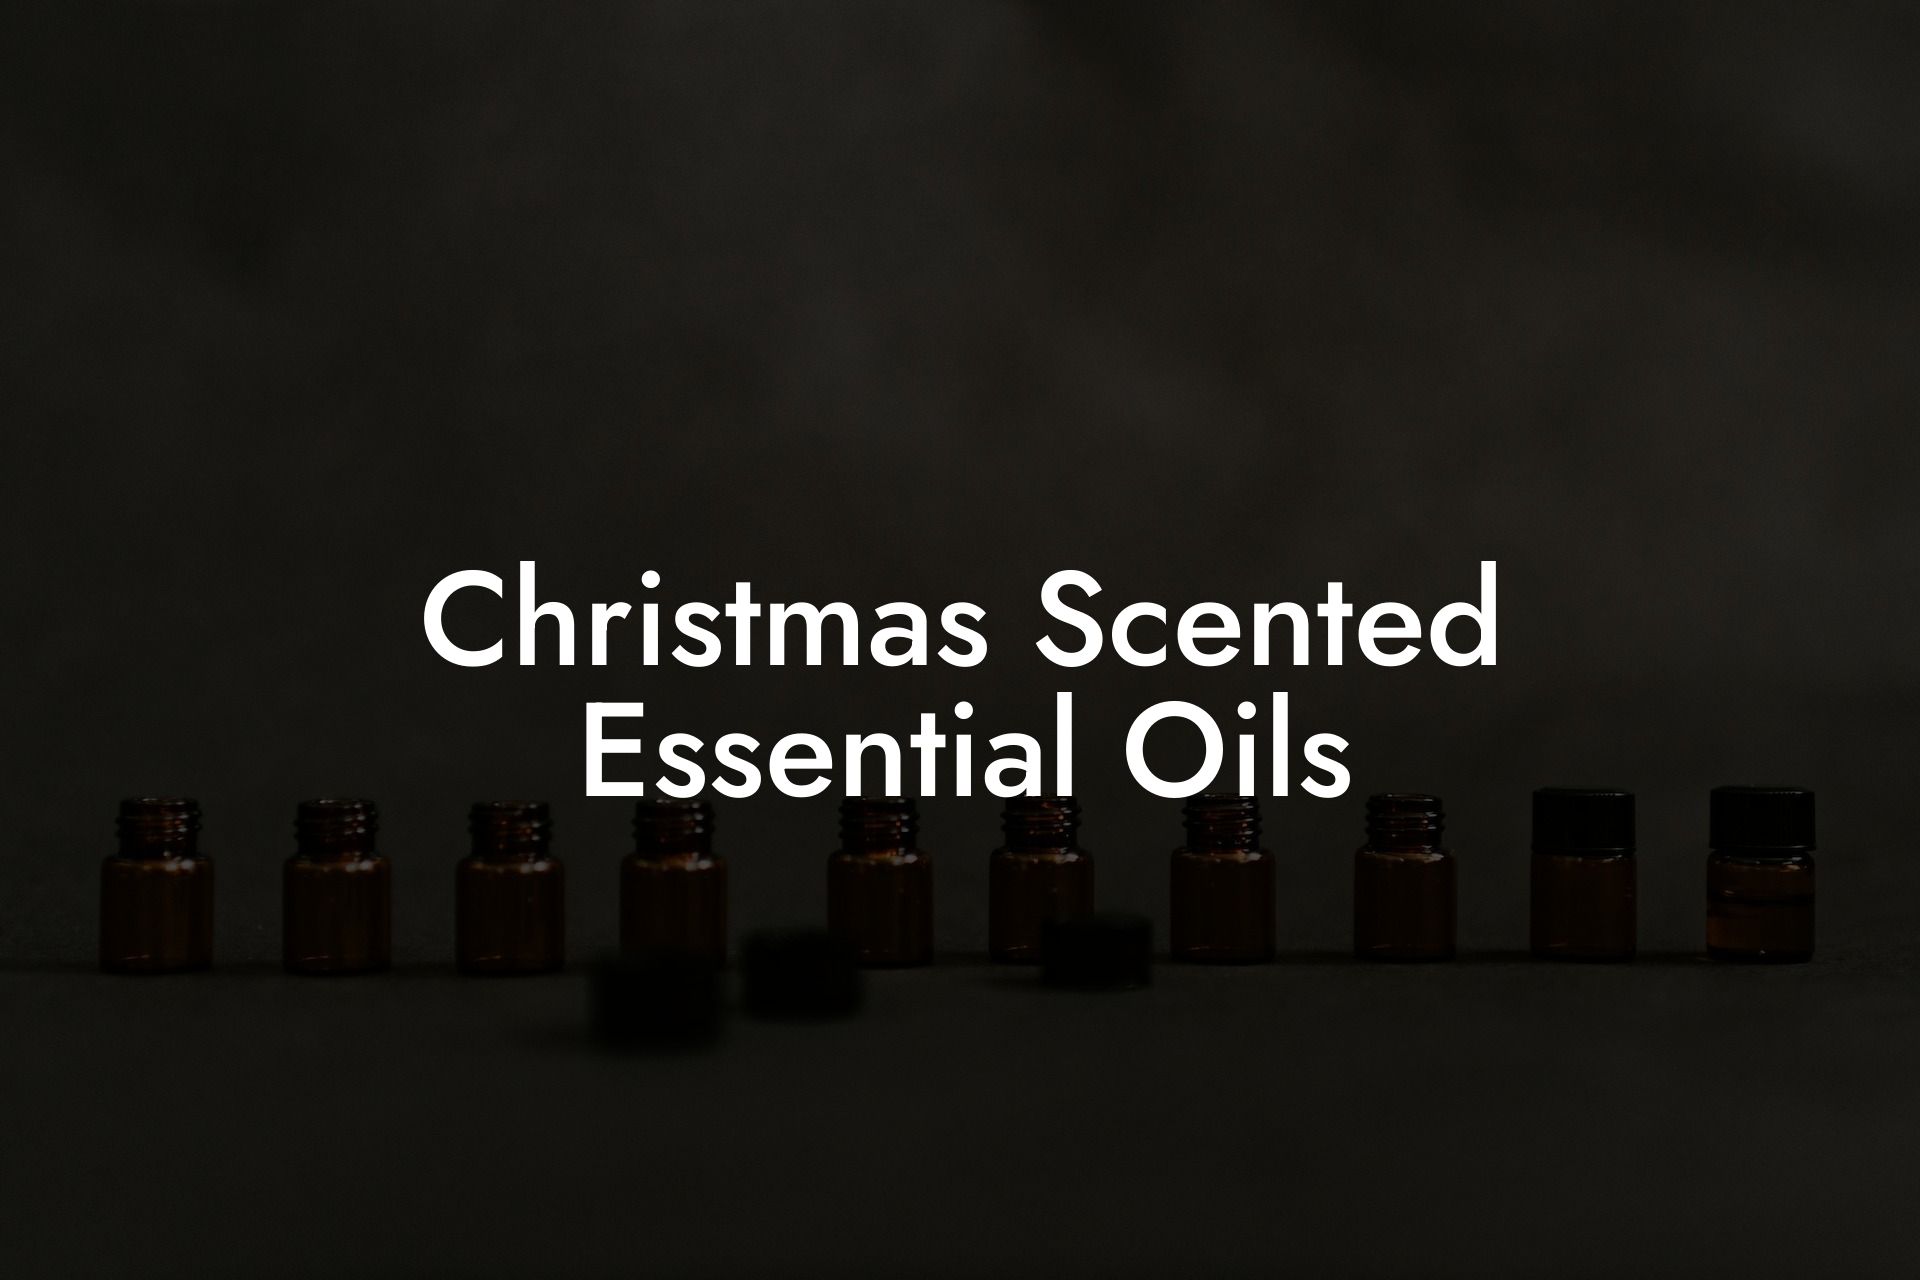 Christmas Scented Essential Oils